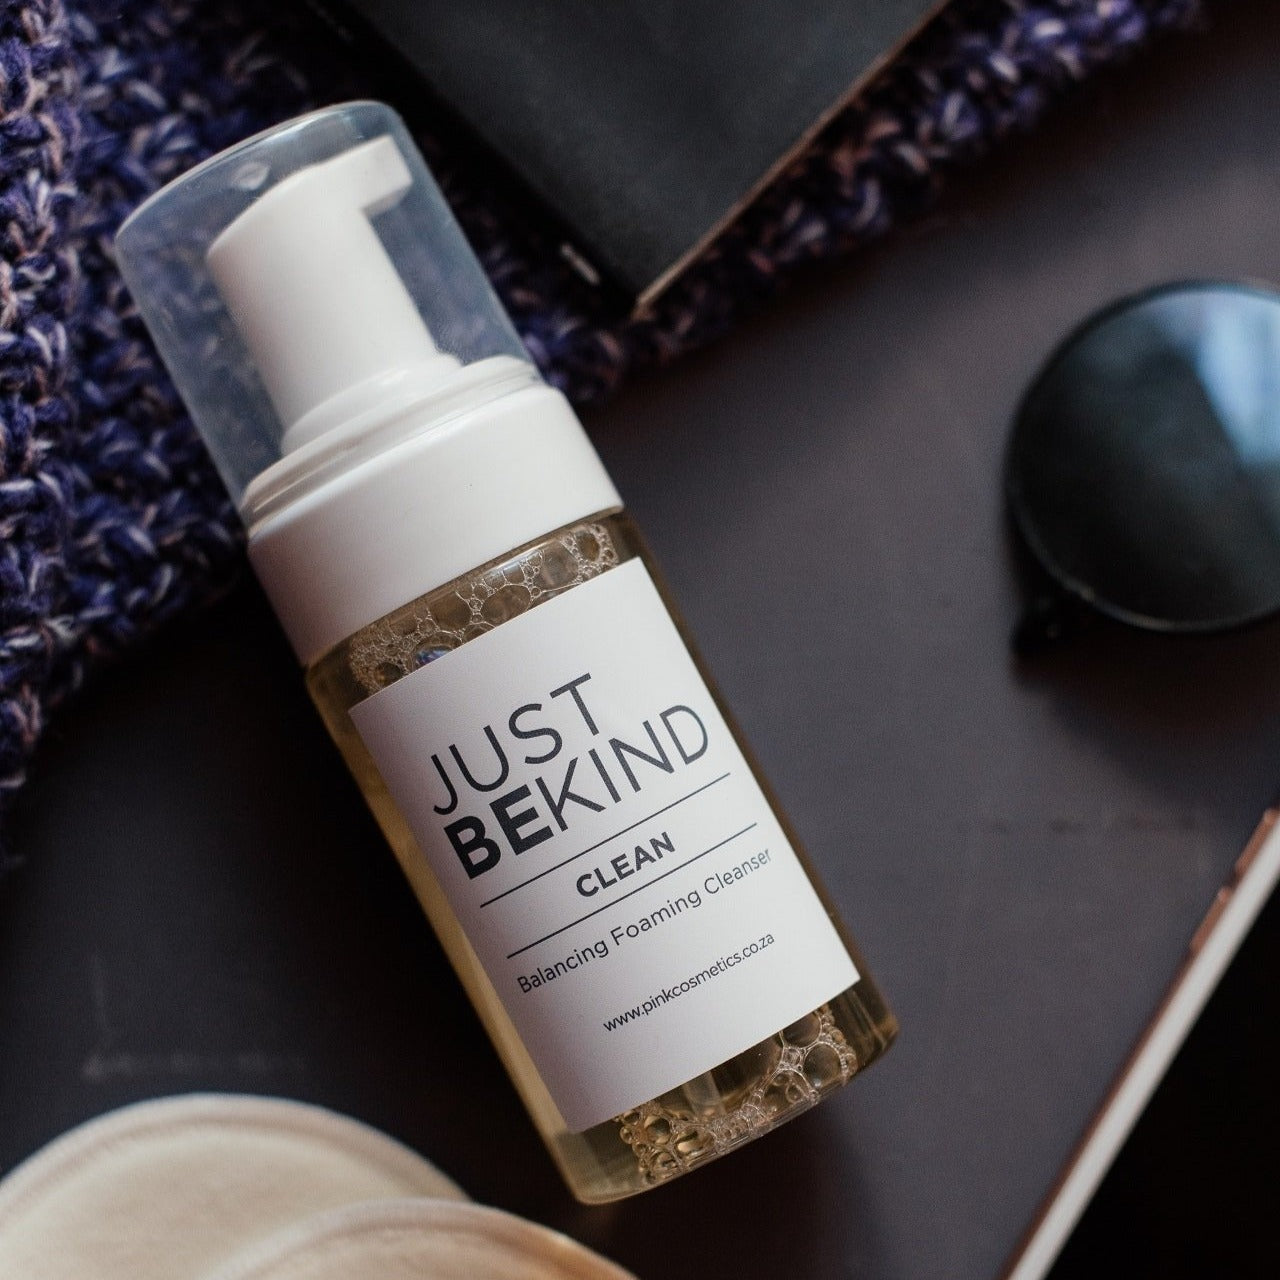 Just be kind- Clean - Foaming Facial Cleanser